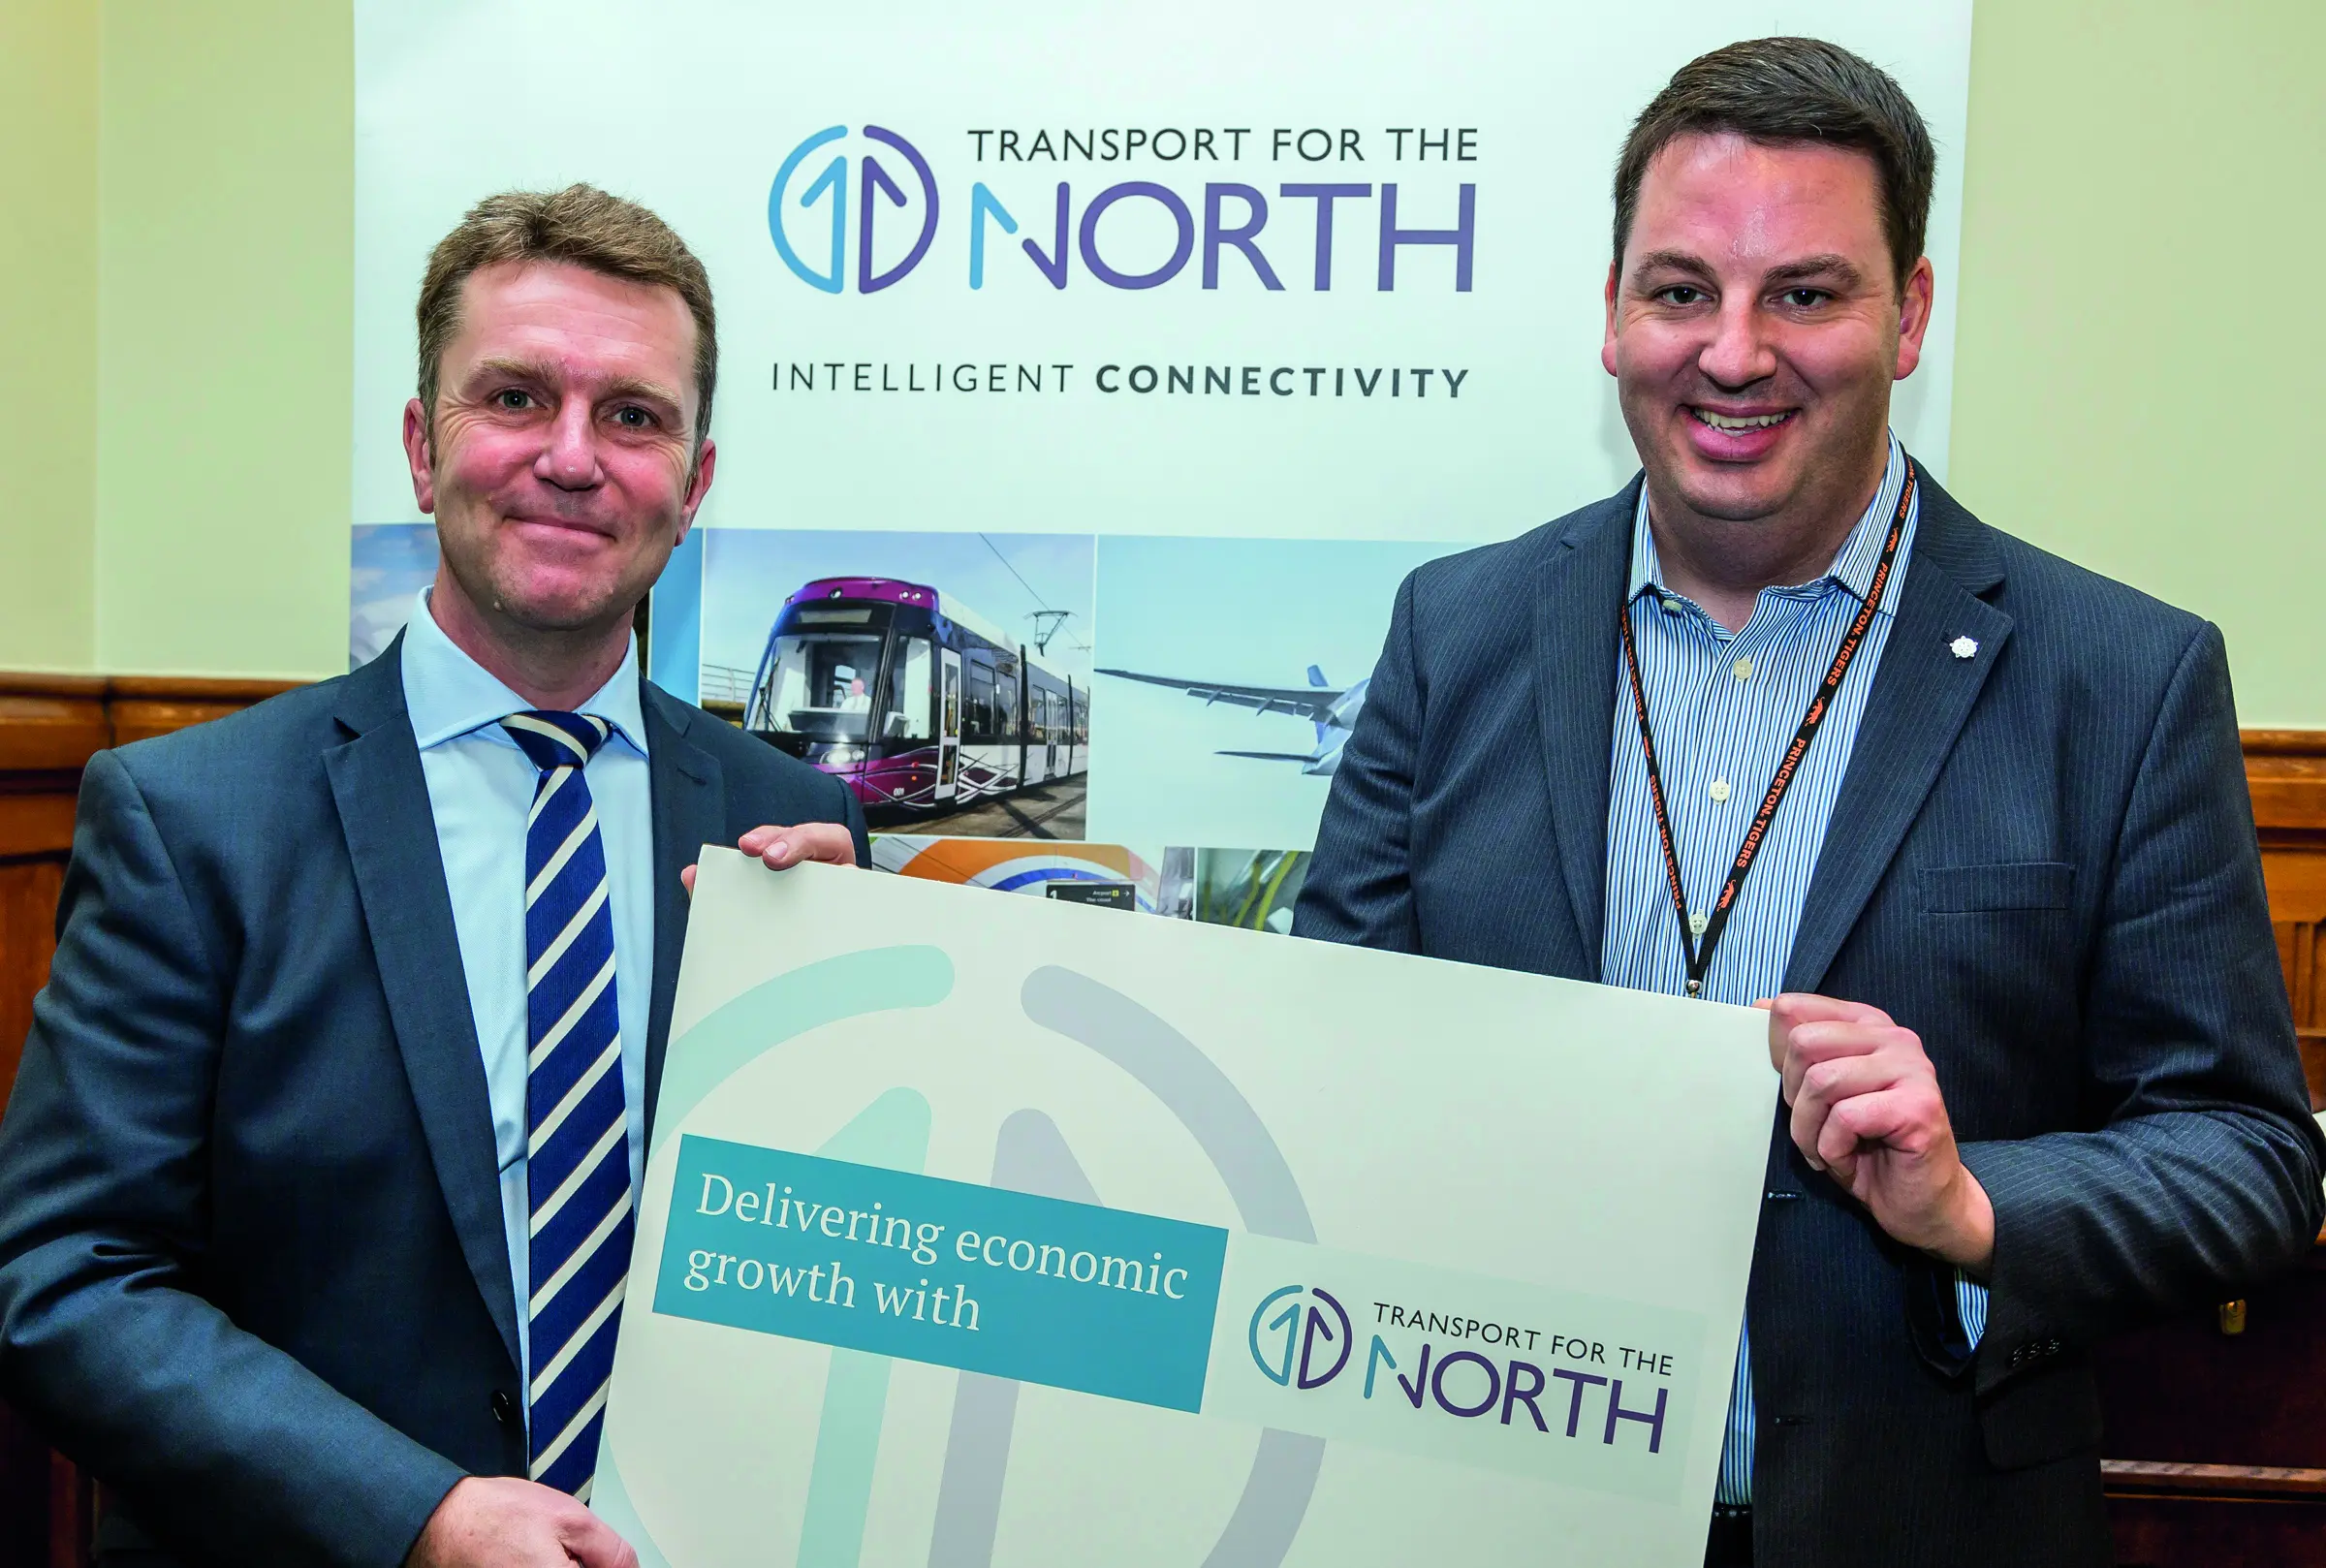 Supporting England’s first sub-National Transport Body